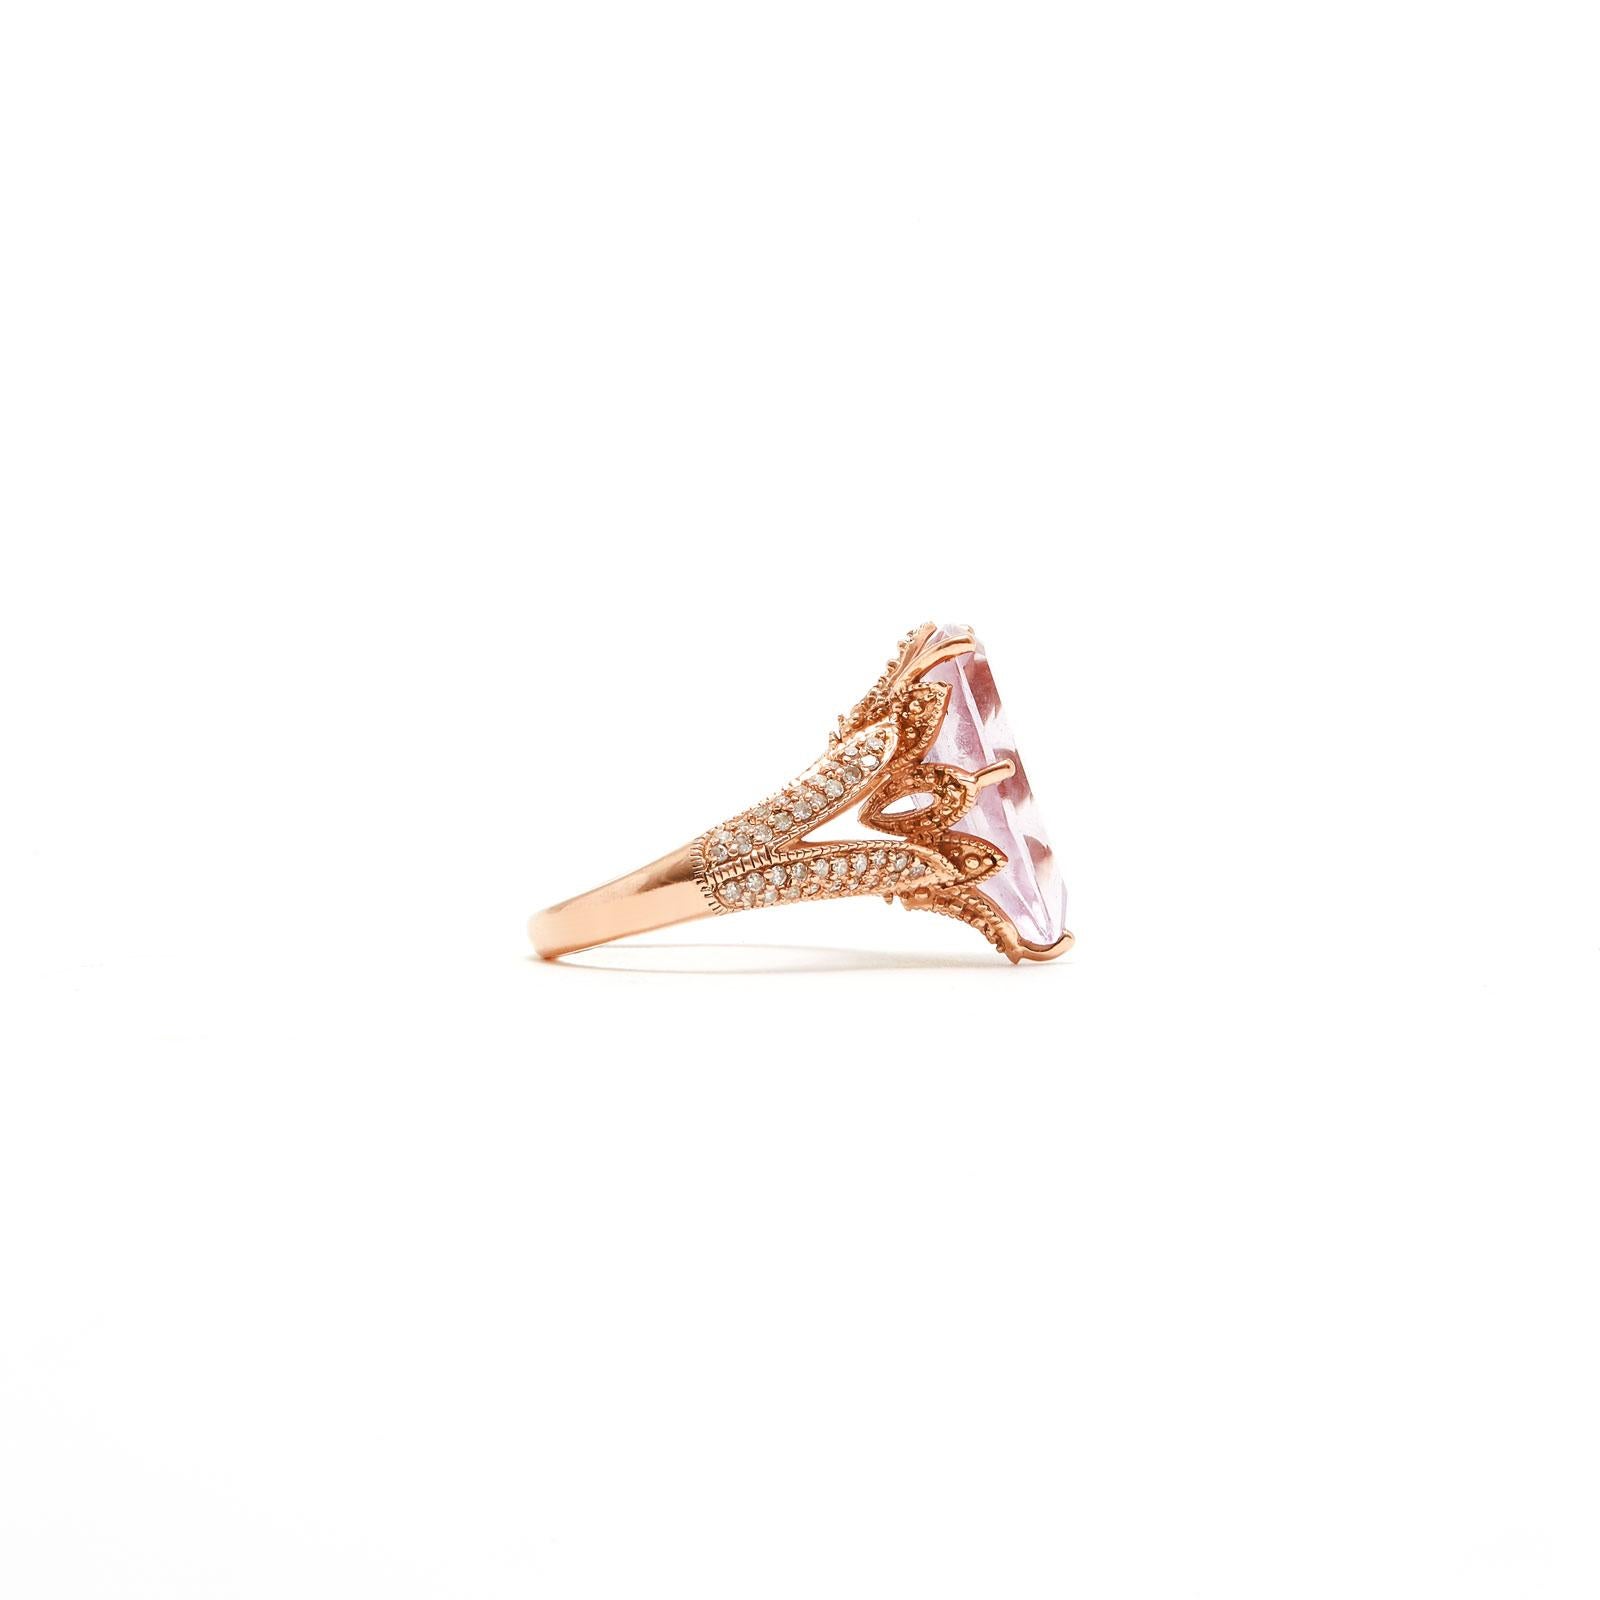 A strikingly beautiful trillion cut pink amethyst accented with diamonds set in rose gold.

- Size US 6.5.- ring is resizable
- Length 19 cm.
- Width/depth 10 cm.